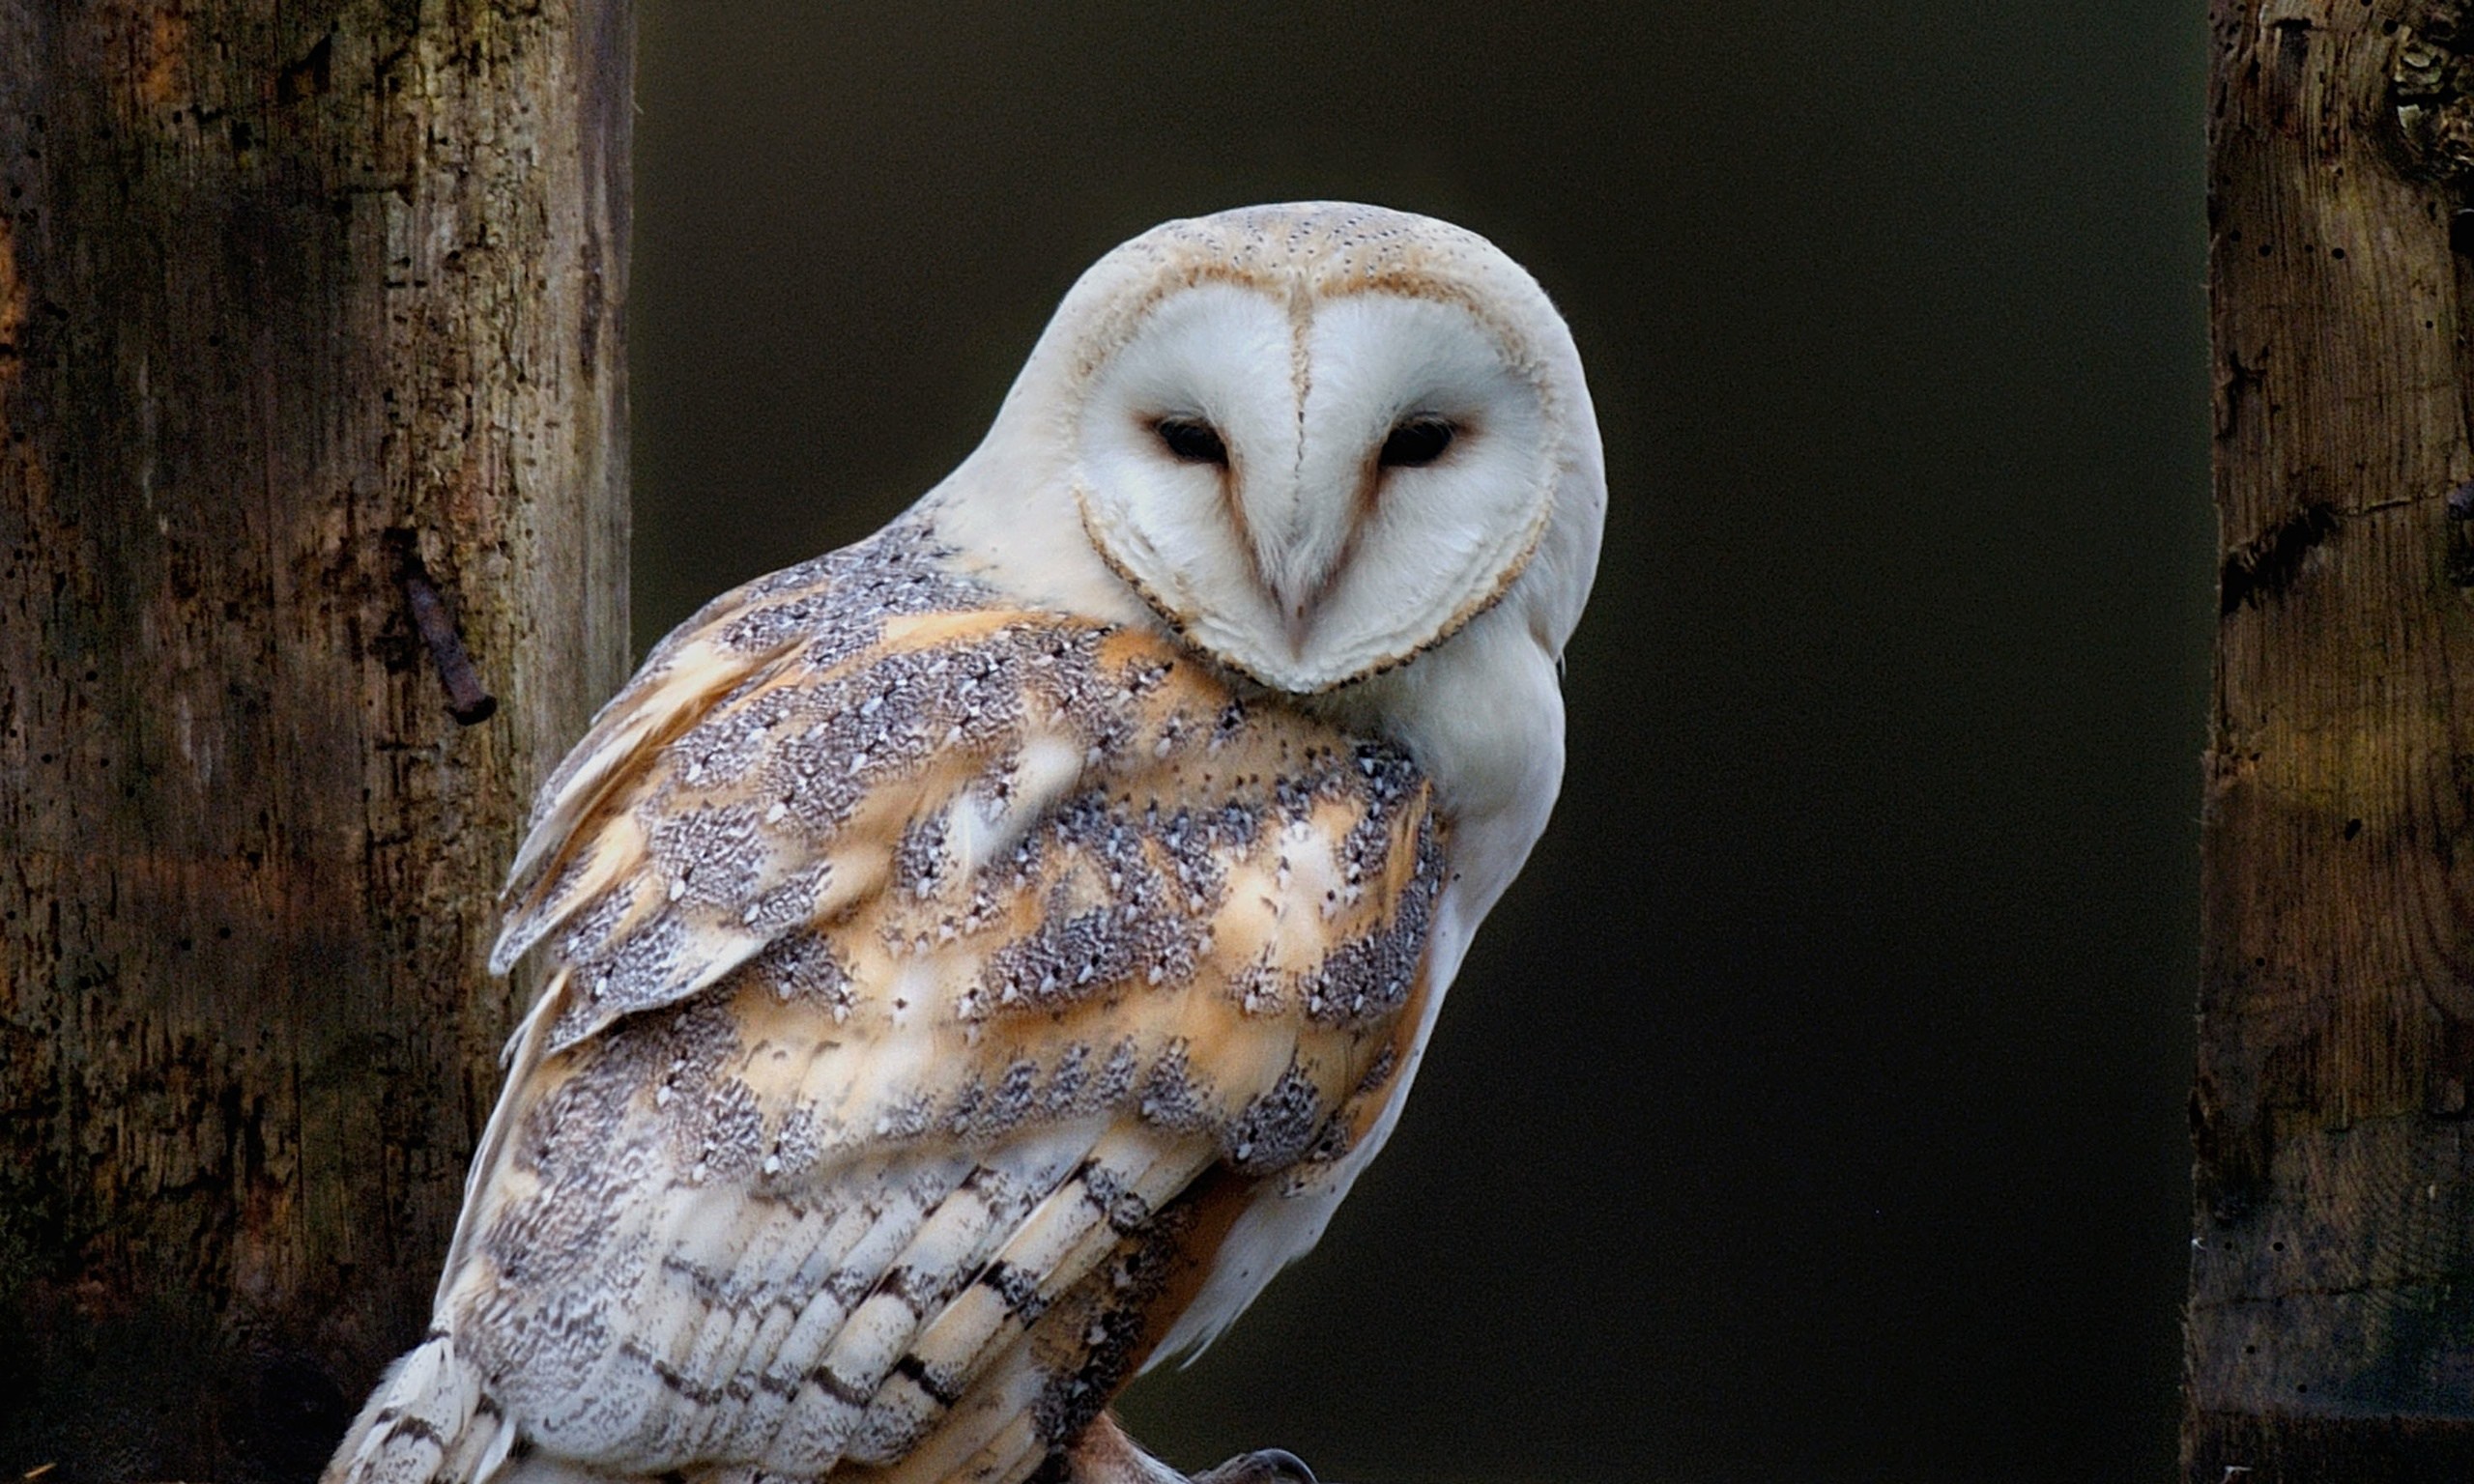 2560x1536 on rat poisons urged to protect barn owls | Environment | The Guardian .